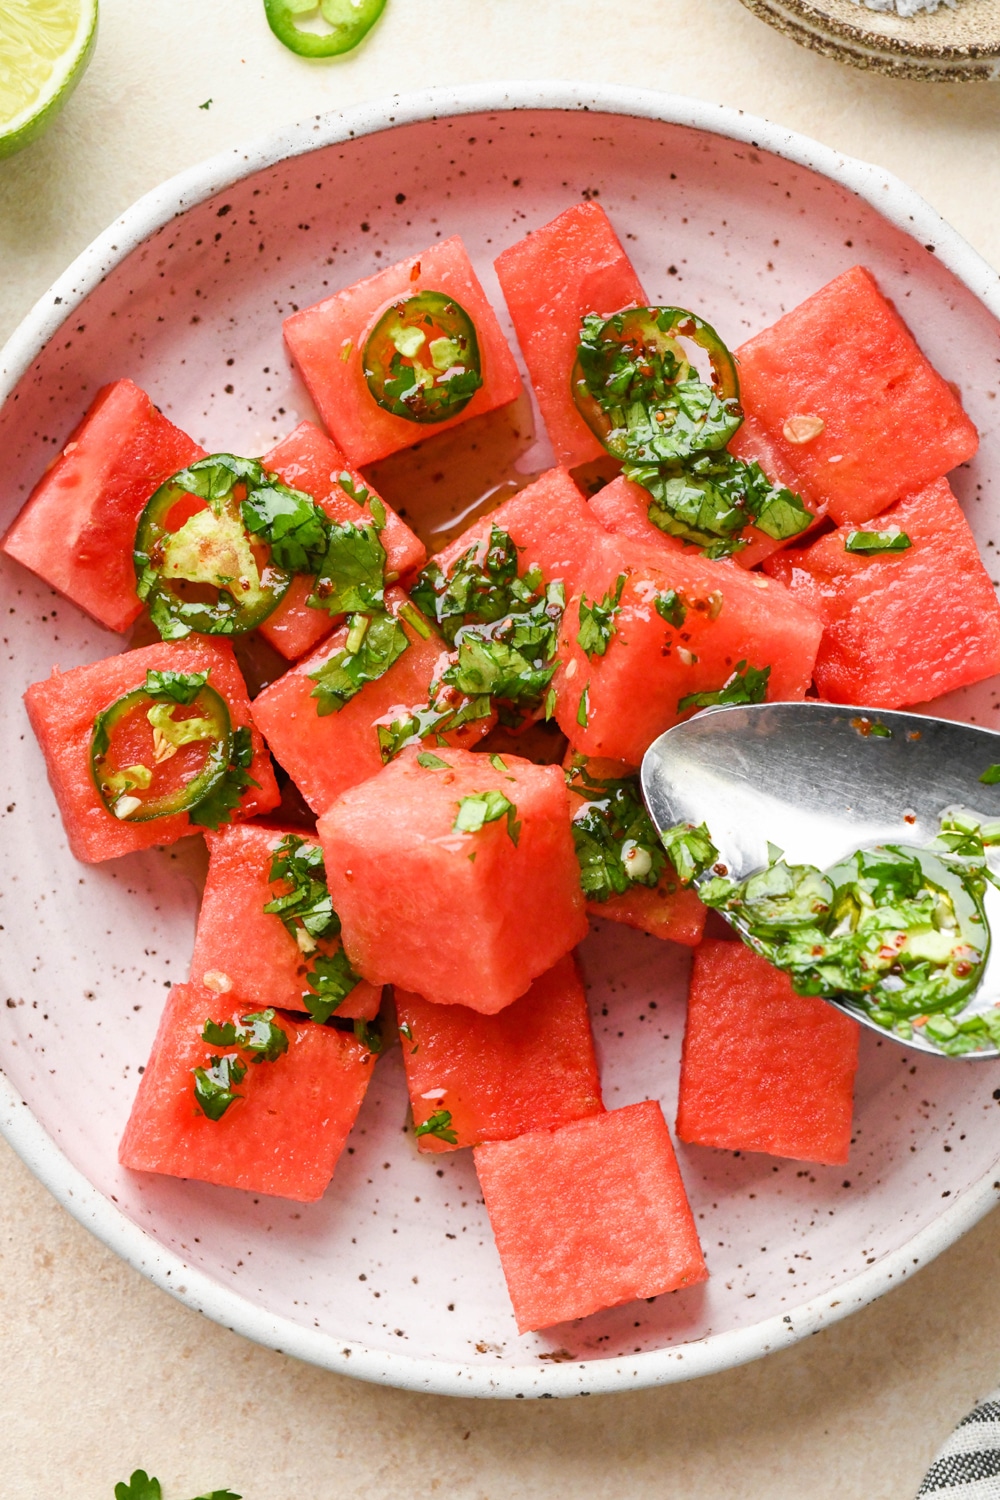 How to make spicy watermelon salad: Spooning the dressing over cubed watermelon in a shallow bowl. 